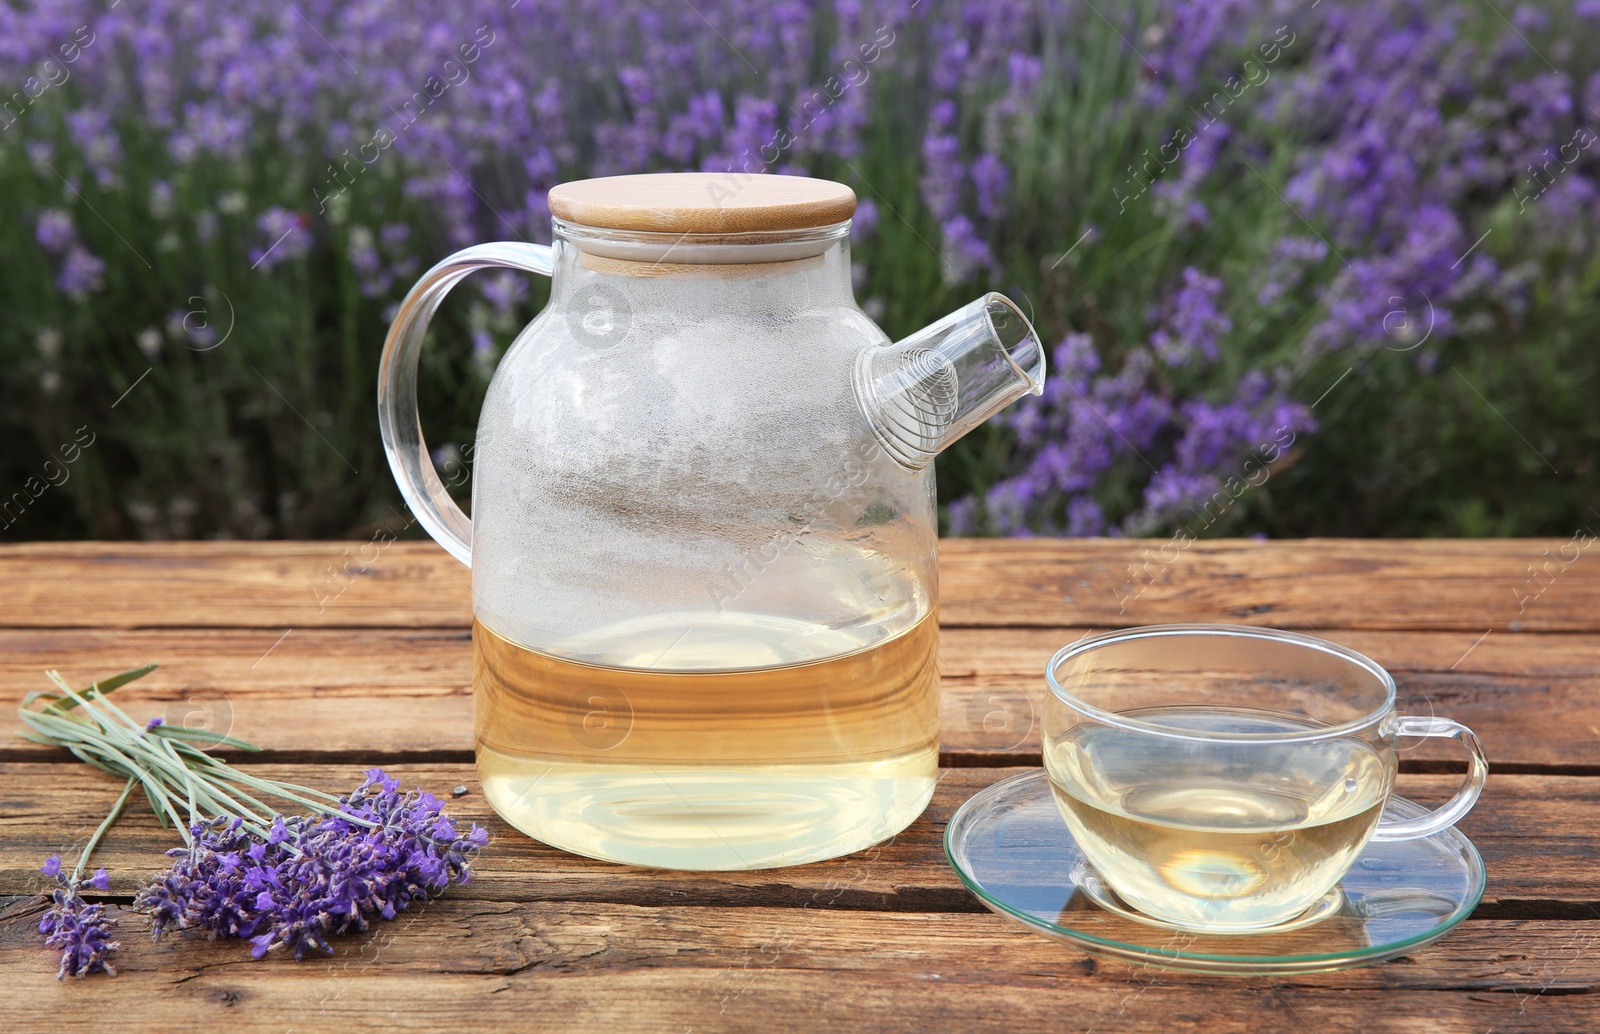 Photo of Tasty herbal tea and fresh lavender flowers on wooden table in field